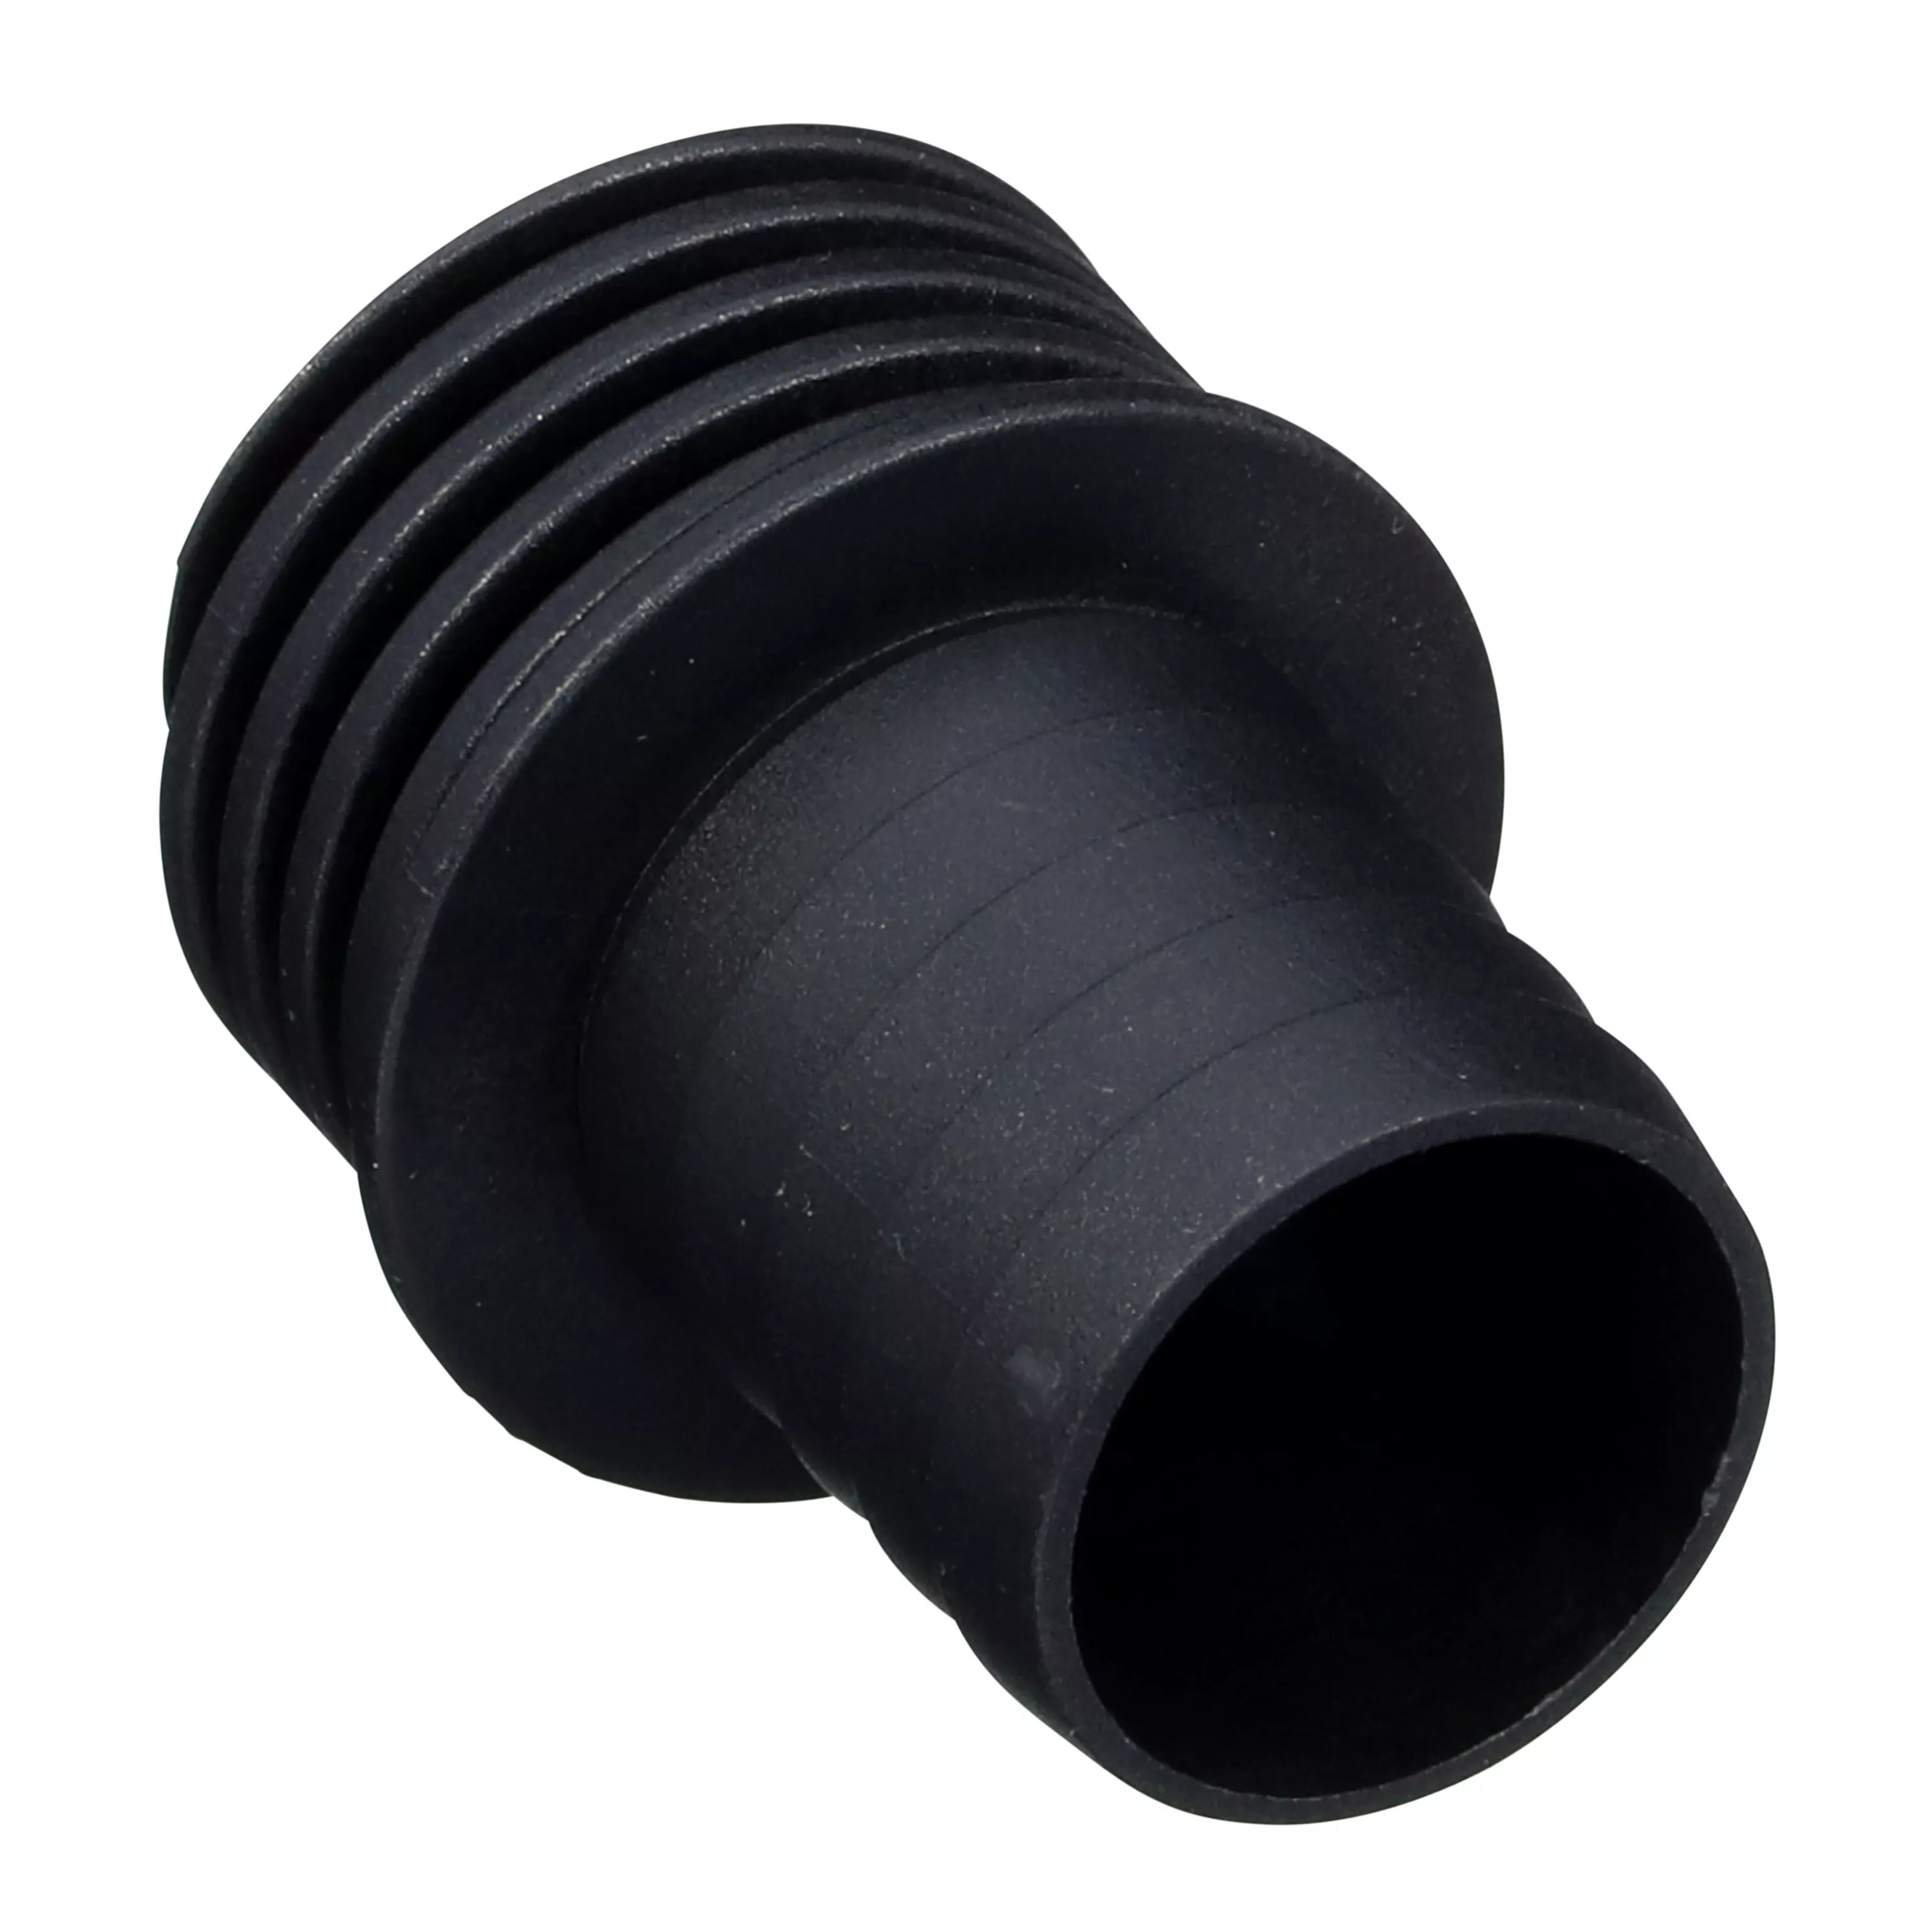 3M™ Vacuum Hose Fitting Adapter 28304, 1 in External Hose Thread x 1 in
Friction Fitting Barb